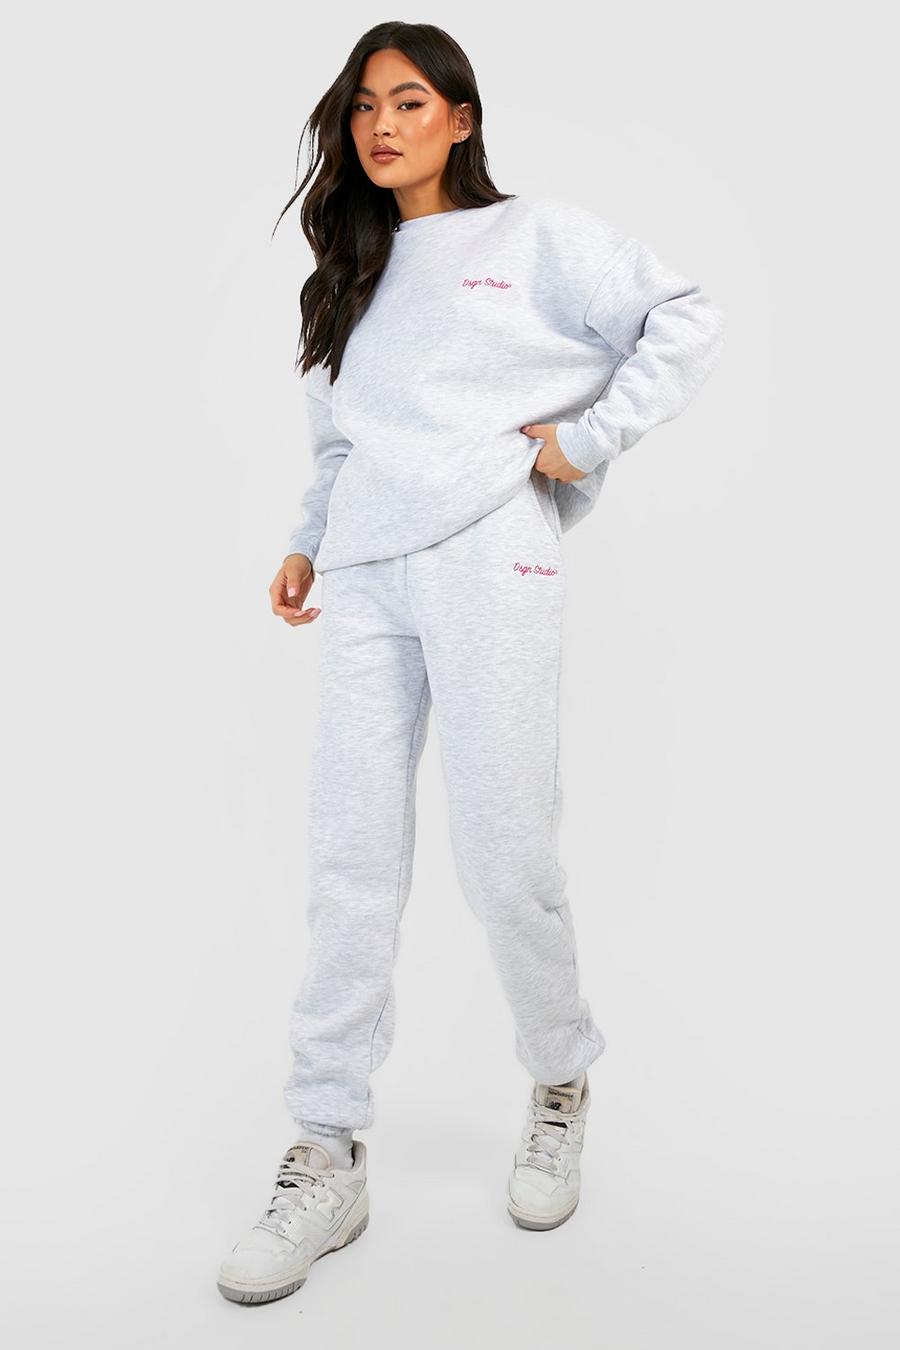 Ash grey Dsgn Studio Embroidered Sweater Tracksuit 